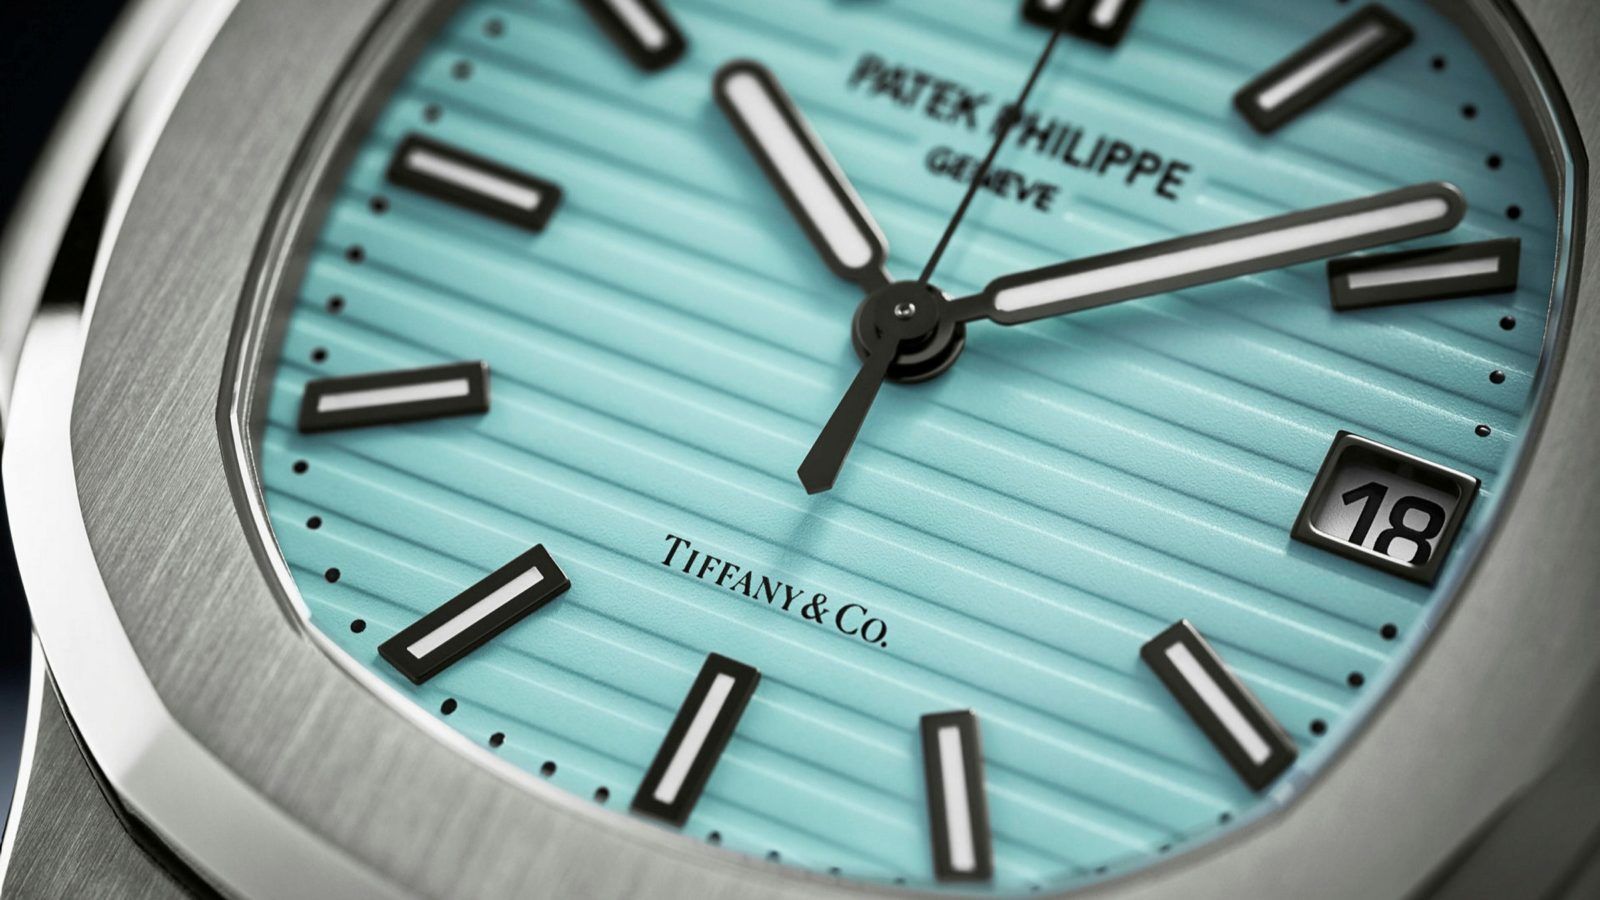 Patek Philippe debuts the Nautilus in a dreamy Tiffany blue